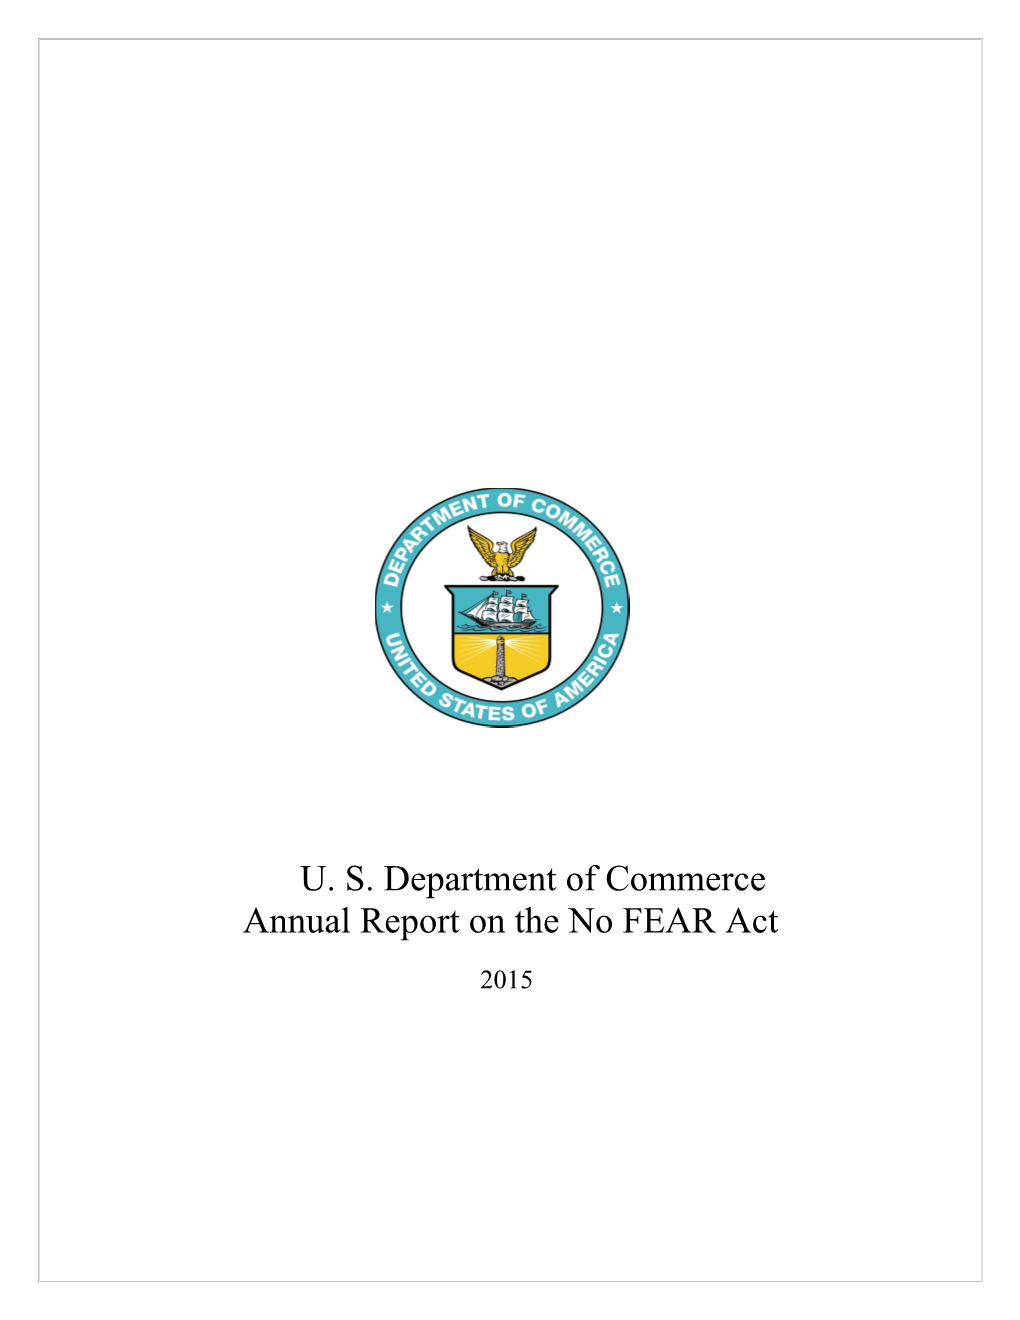 The Department of Commerce Is Pleased to Submit This Annual Report in Accordance with Section